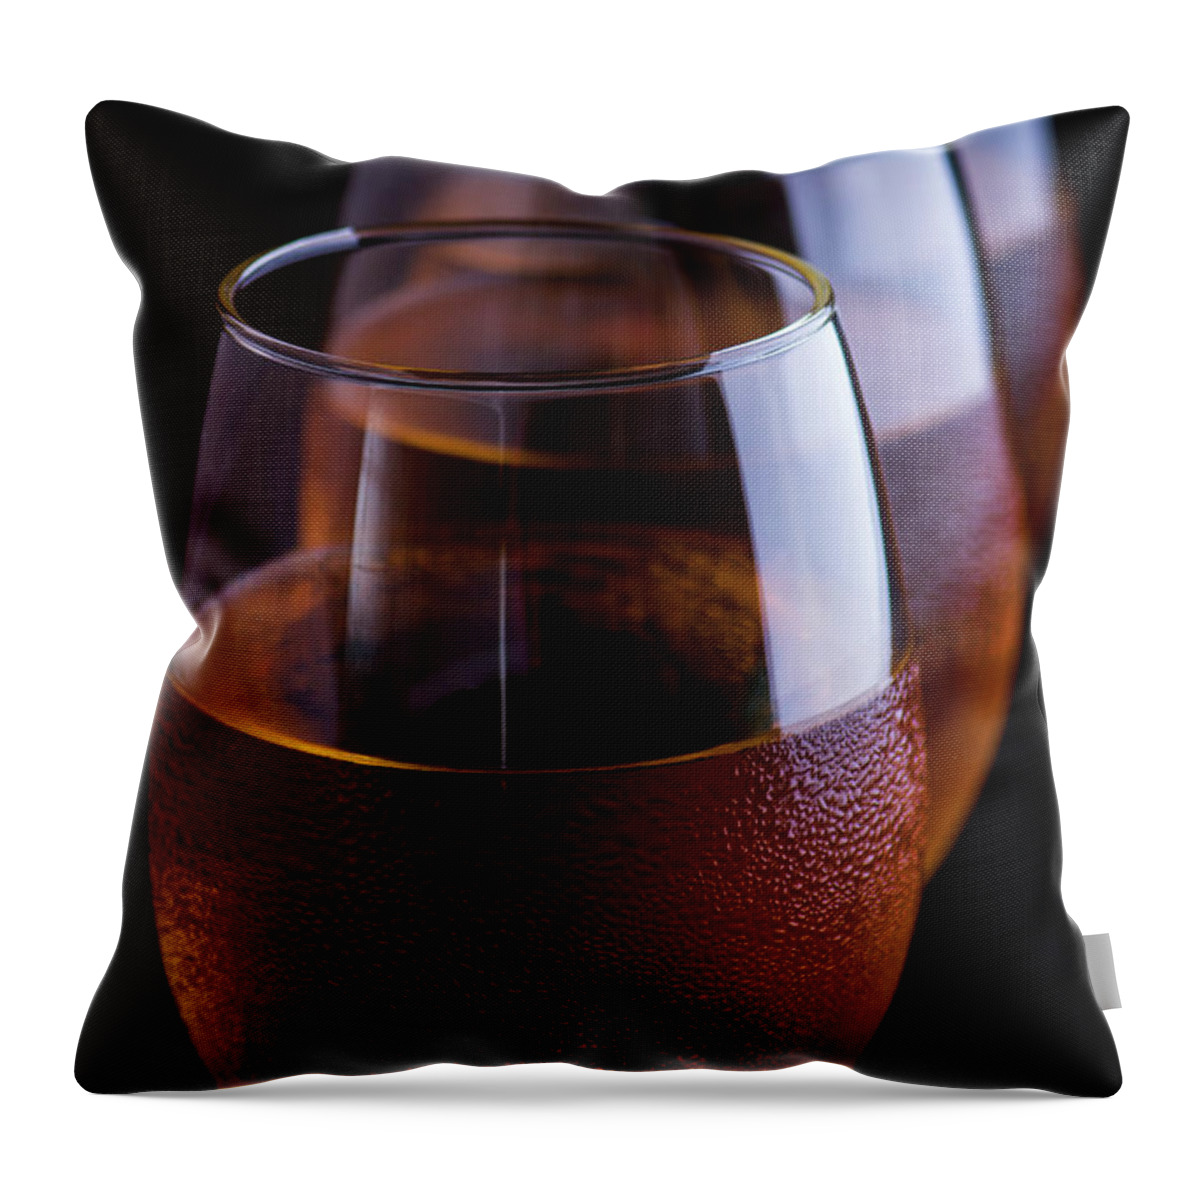 Liquid Throw Pillow featuring the photograph Still Life Drinks by Ester McGuire